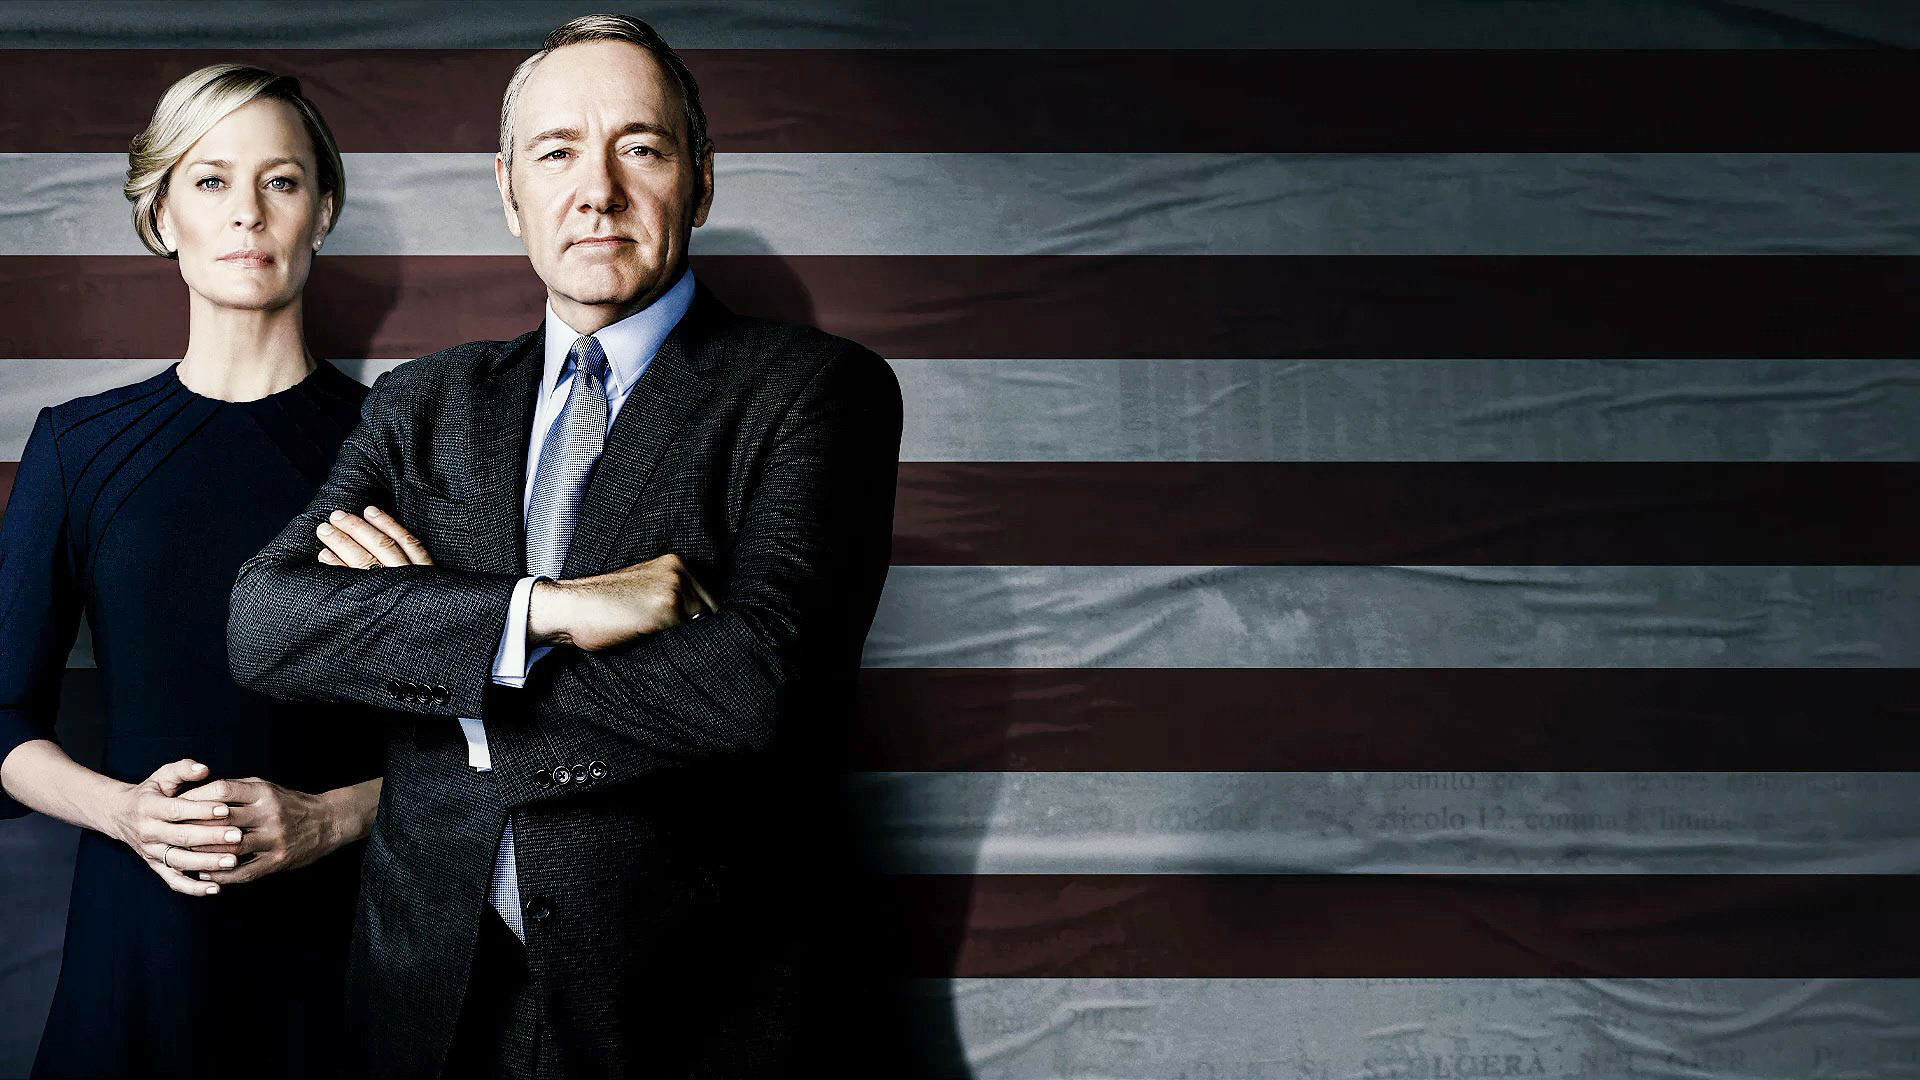 House of Cards: The show earned eight Golden Globe Award nominations. 1920x1080 Full HD Wallpaper.